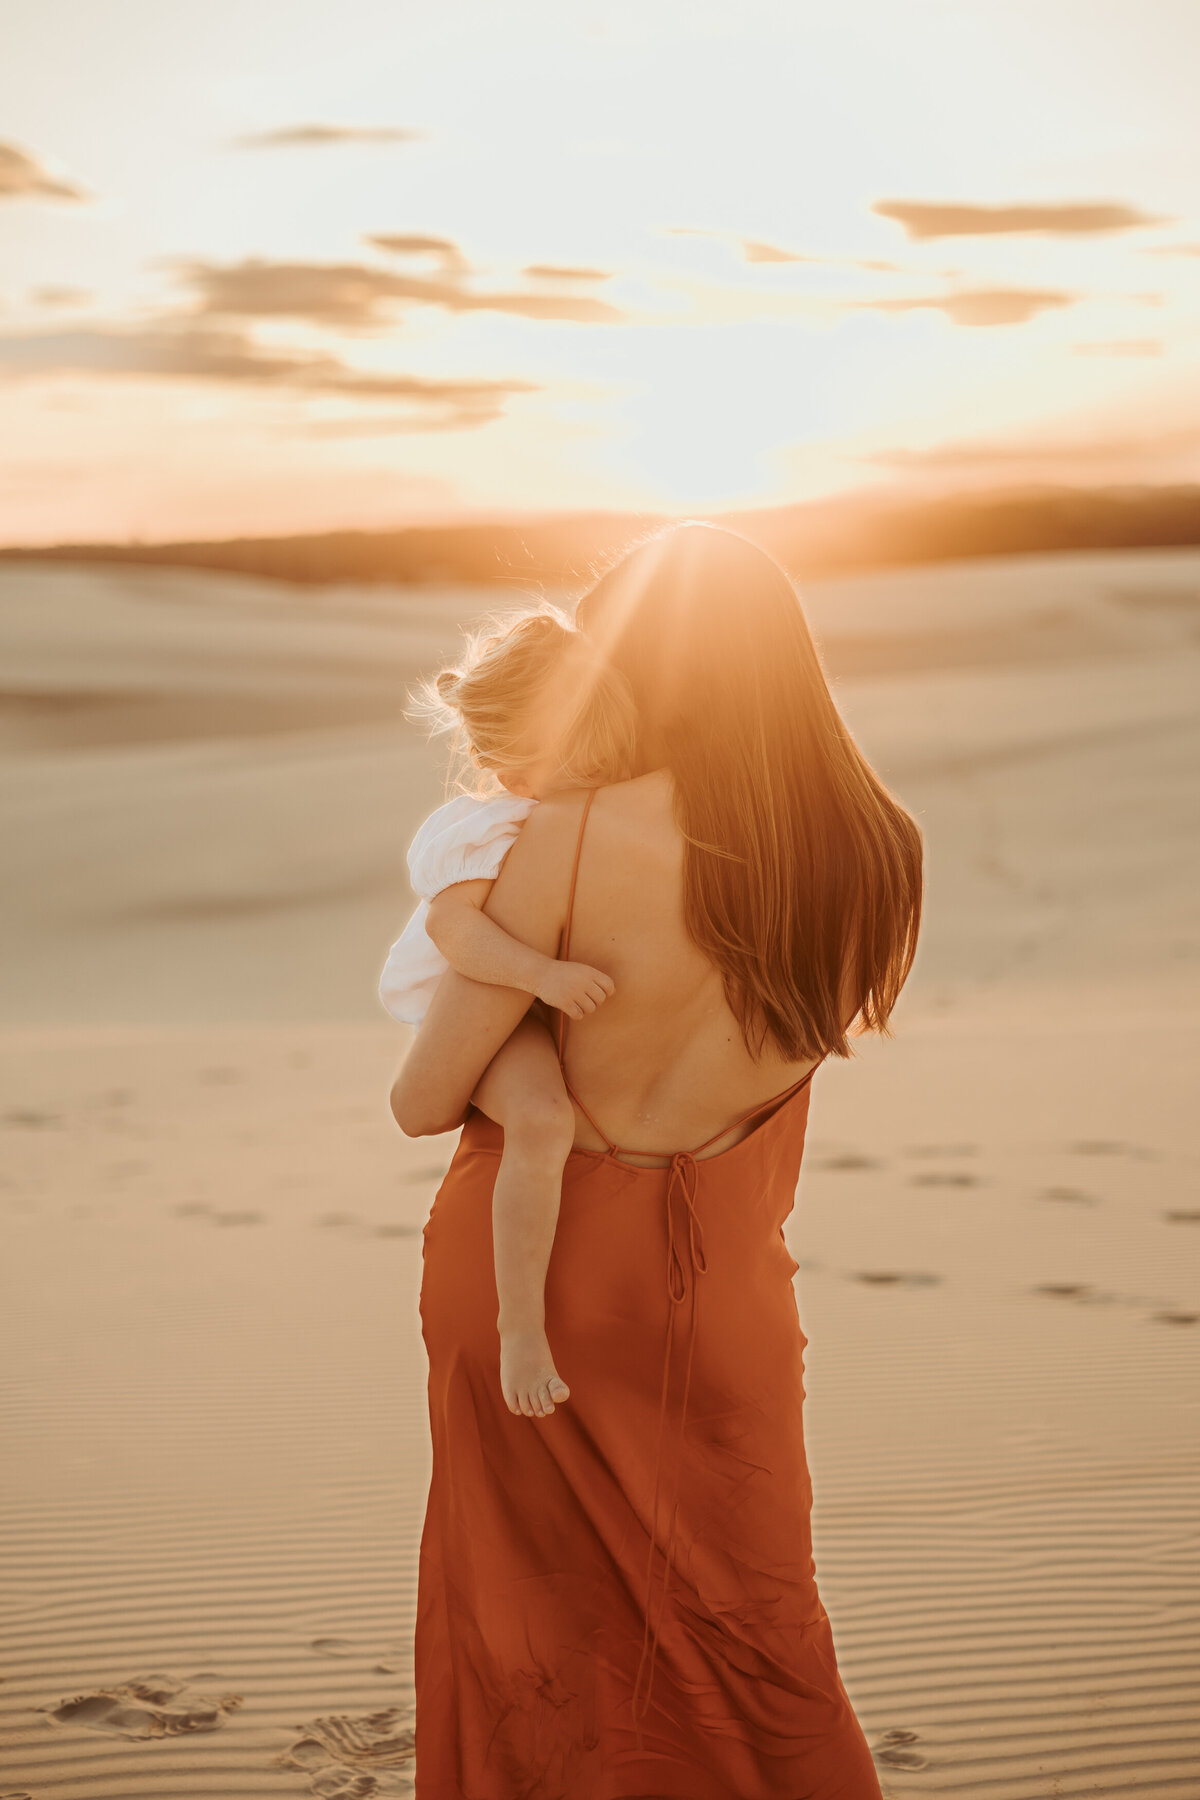 Little girl has her blonde head buried into her mum's shoulder while mum gazes towards the sun so her back is shown to the camera.